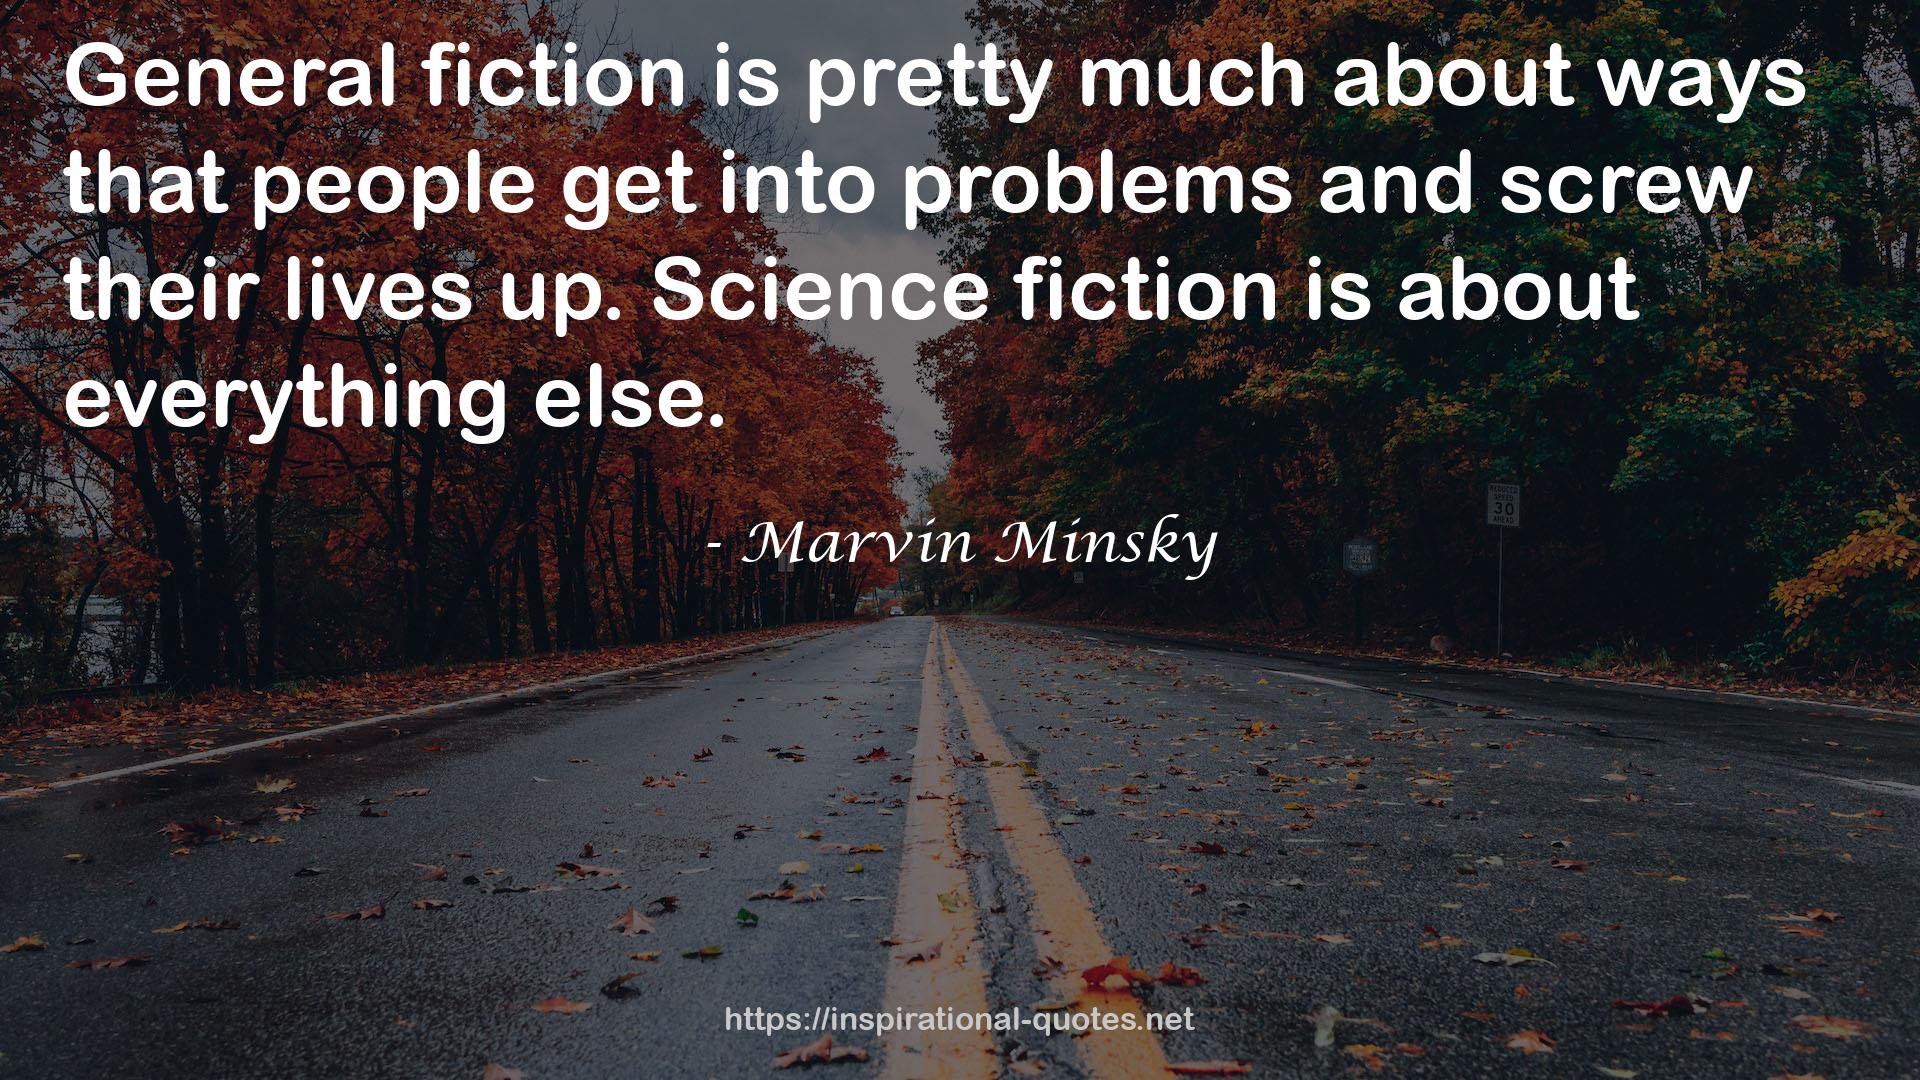 Marvin Minsky QUOTES